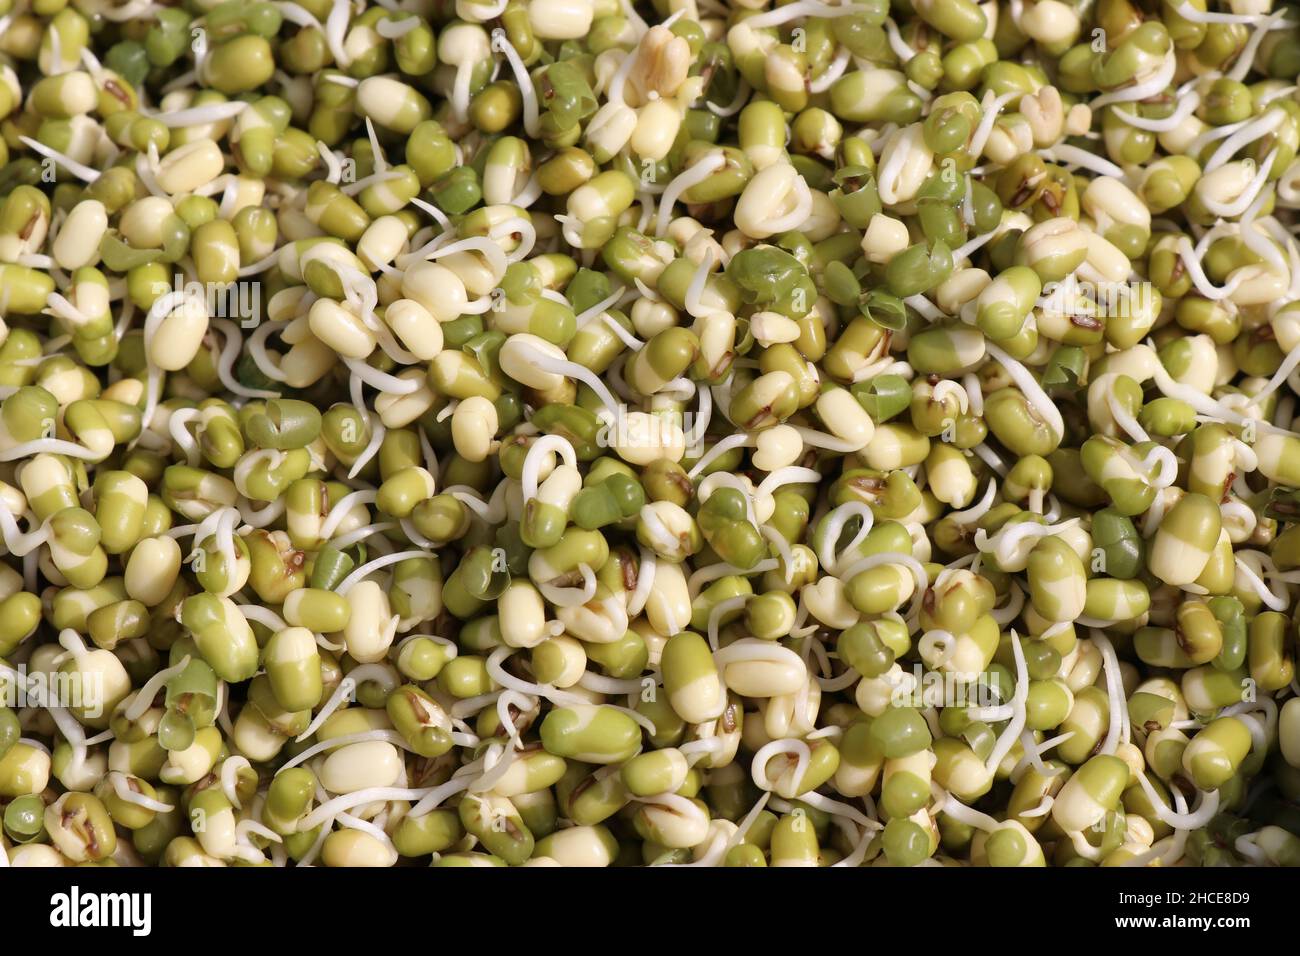 Green gram sprouts close up view which is a healthy food consumed as a salad Stock Photo